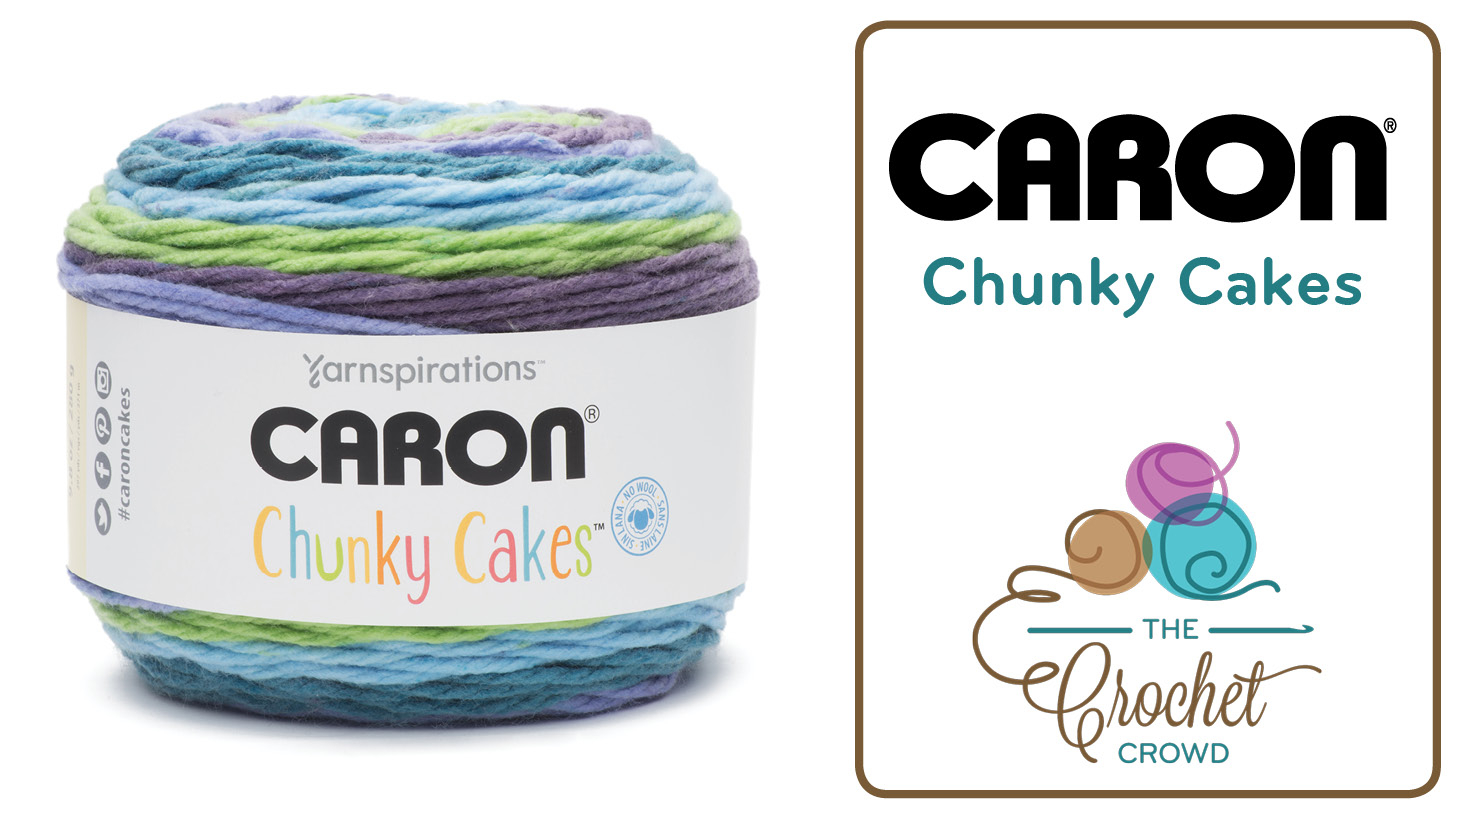 Caron Crochet Patterns What To Do With Caron Chunky Cakes The Crochet Crowd